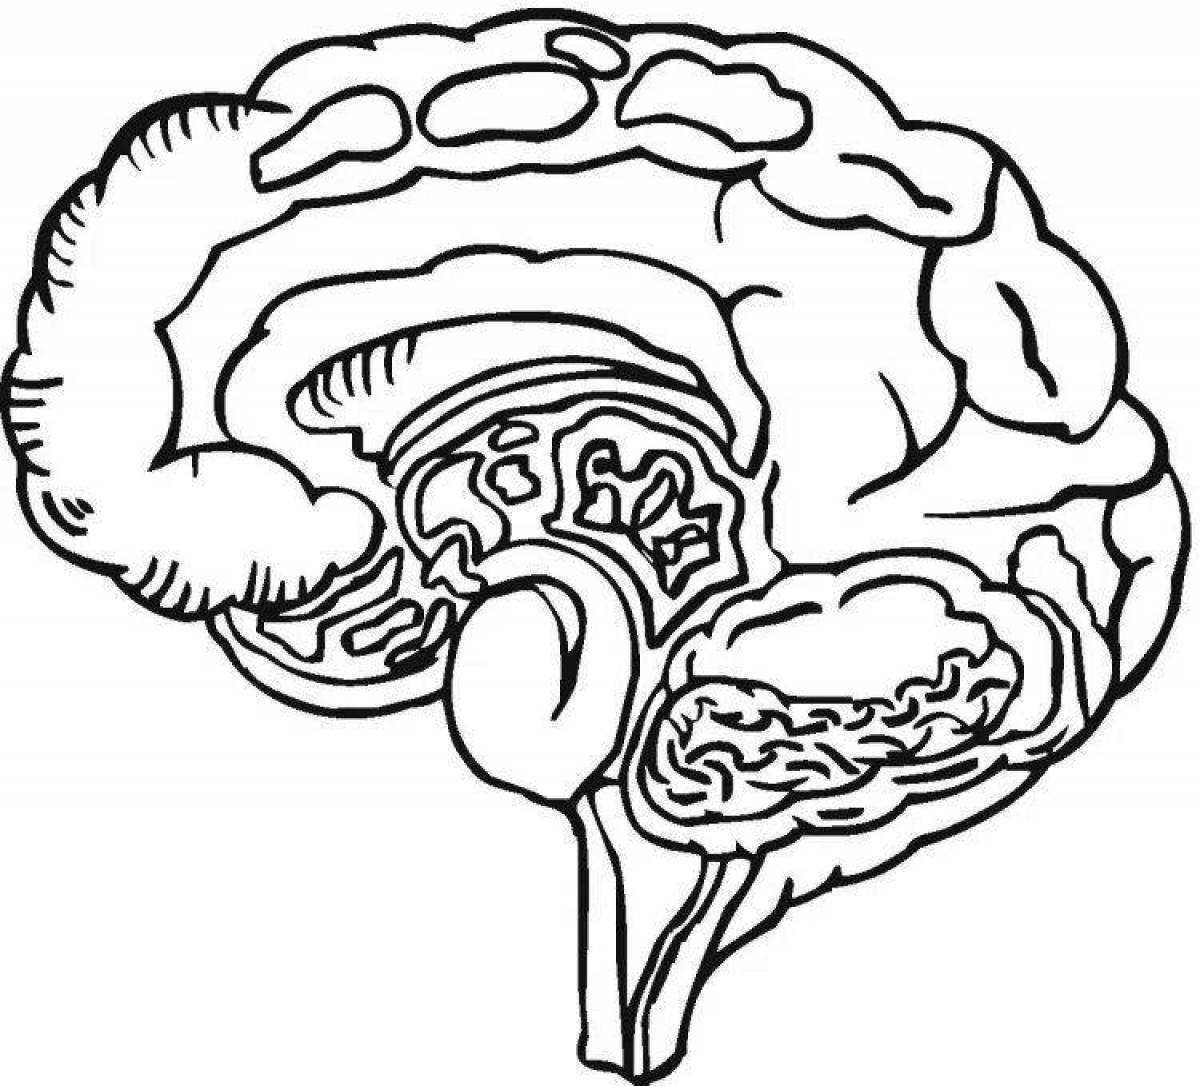 Intricate brain coloring page